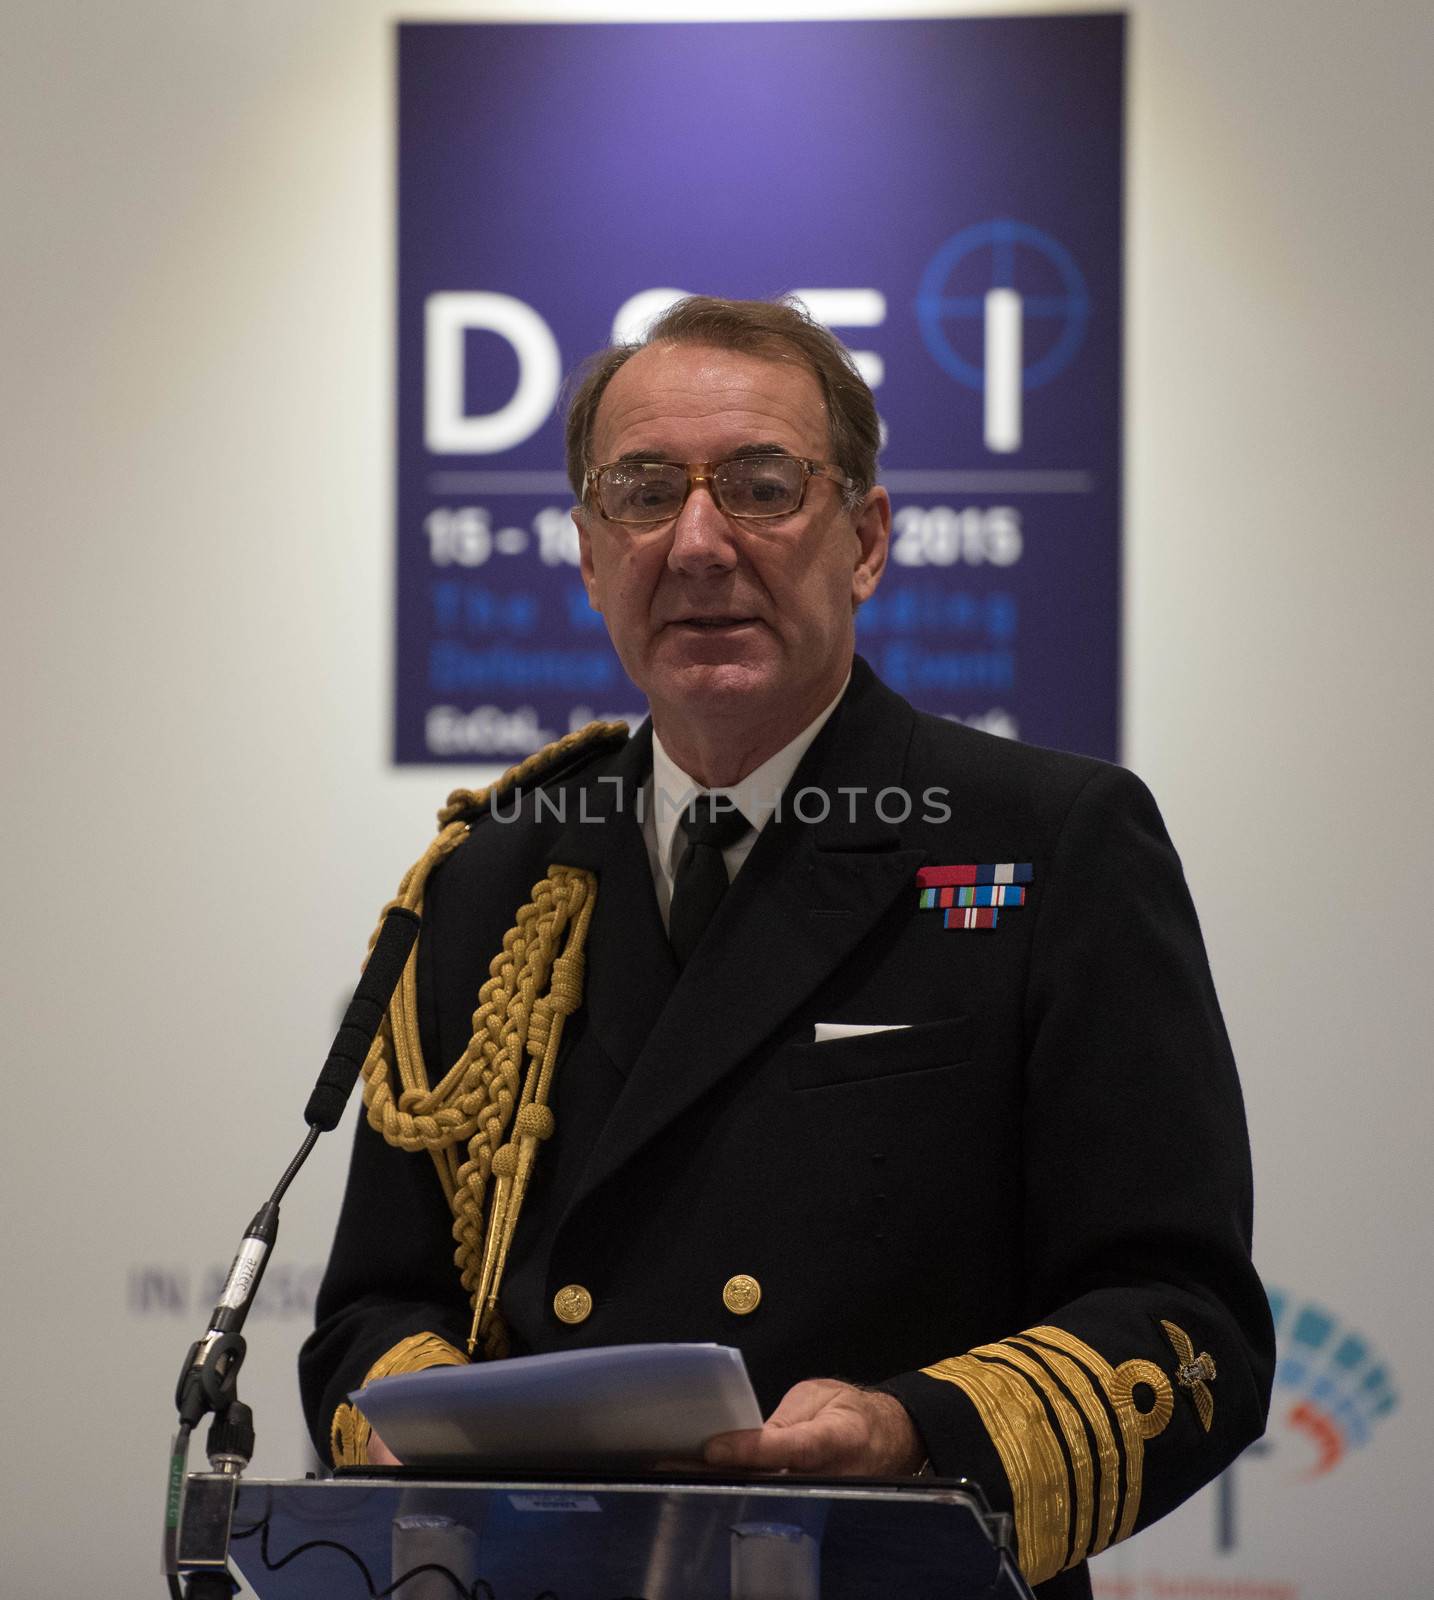 UNITED KINGDOM, London: Naval Officer	The Defence and Security International Exhibition (DSEI) began in London on September 15, 2015 despite a week of direct action protests by peace campaigners.  	The arms fair has seen over 30,000 people descend on London to see the 1,500 exhibitors who are displaying weapons of war from pistols and rifles up to tanks, assault helicopters and warships.  	Protesters attempted to block the main road into the exhibition, claiming that such an event strengthened the UK's ties to human rights abuses. 